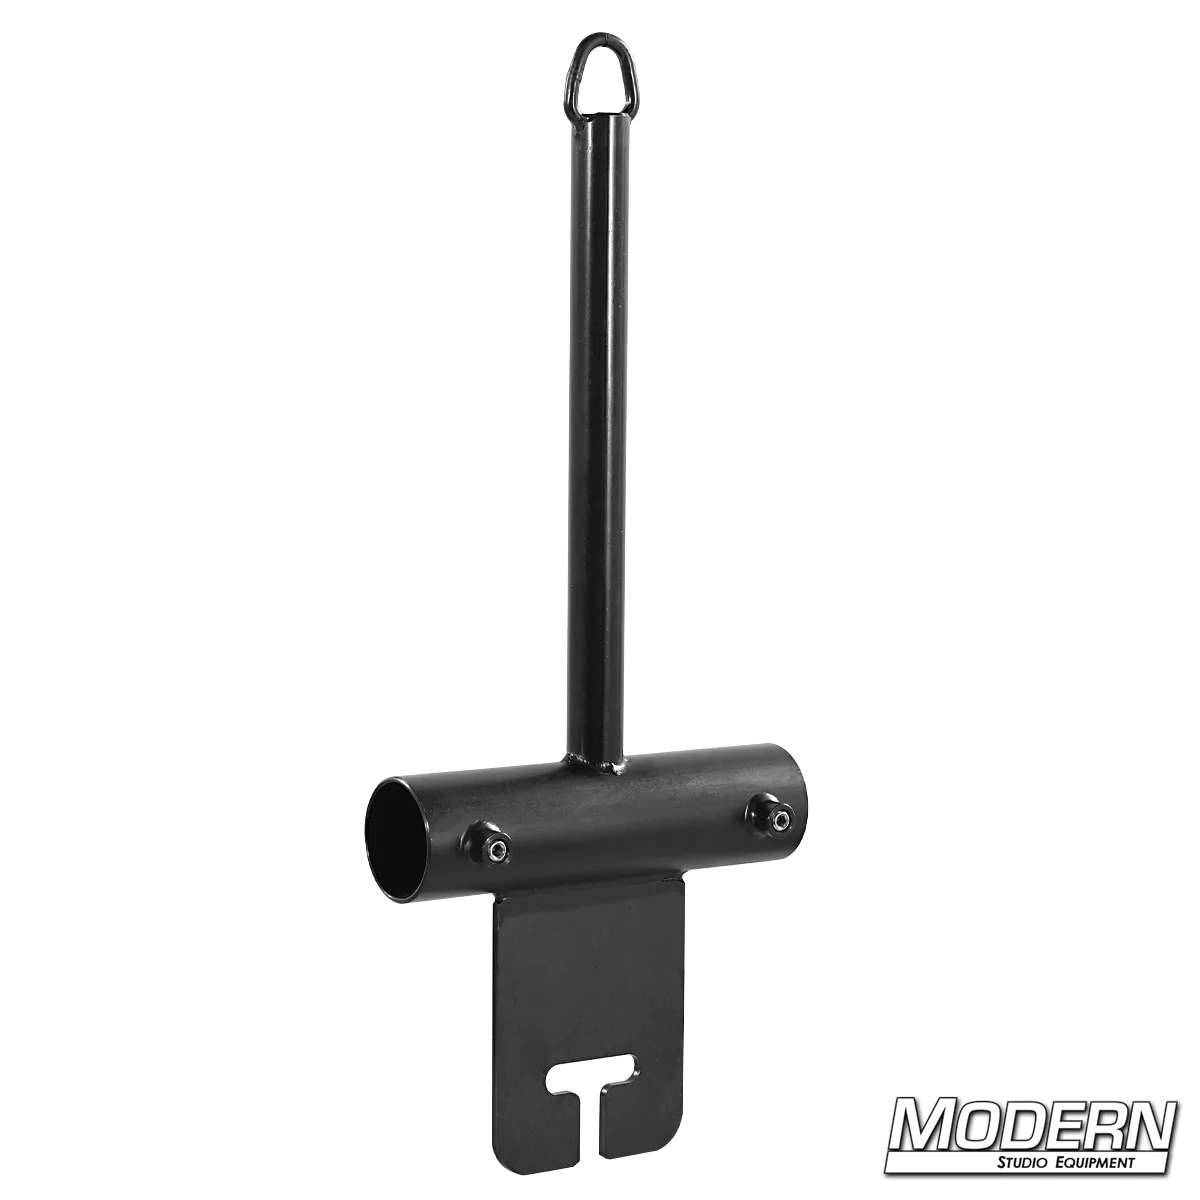 Center Boom Post with Ear for 1-1/2" Speed-Rail® - Black Zinc